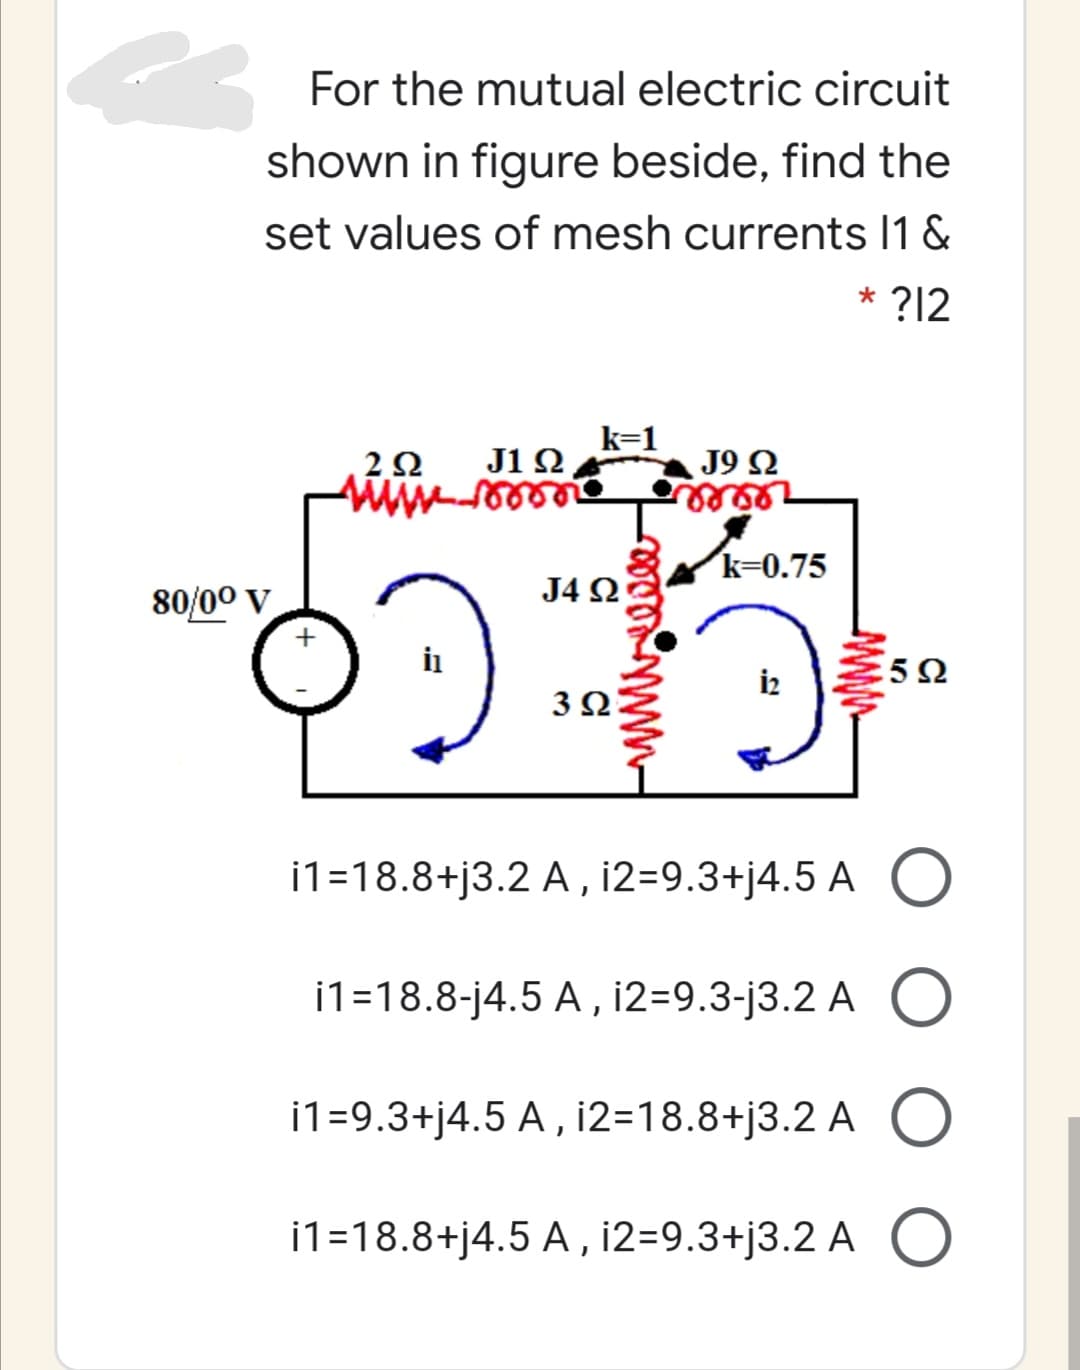 For the mutual electric circuit
shown in figure beside, find the
set values of mesh currents I1 &
* ?12
k=1
J1 Ω
J9 2
k=0.75
80/00 v
J4 2
i2
3Ω
i1=18.8+j3.2 A, i2=9.3+j4.5 A O
i1=18.8-j4.5 A , i2=9.3-j3.2 A
i1=9.3+j4.5 A , i2=18.8+j3.2 A
i1=18.8+j4.5 A, i2=9.3+j3.2 A
